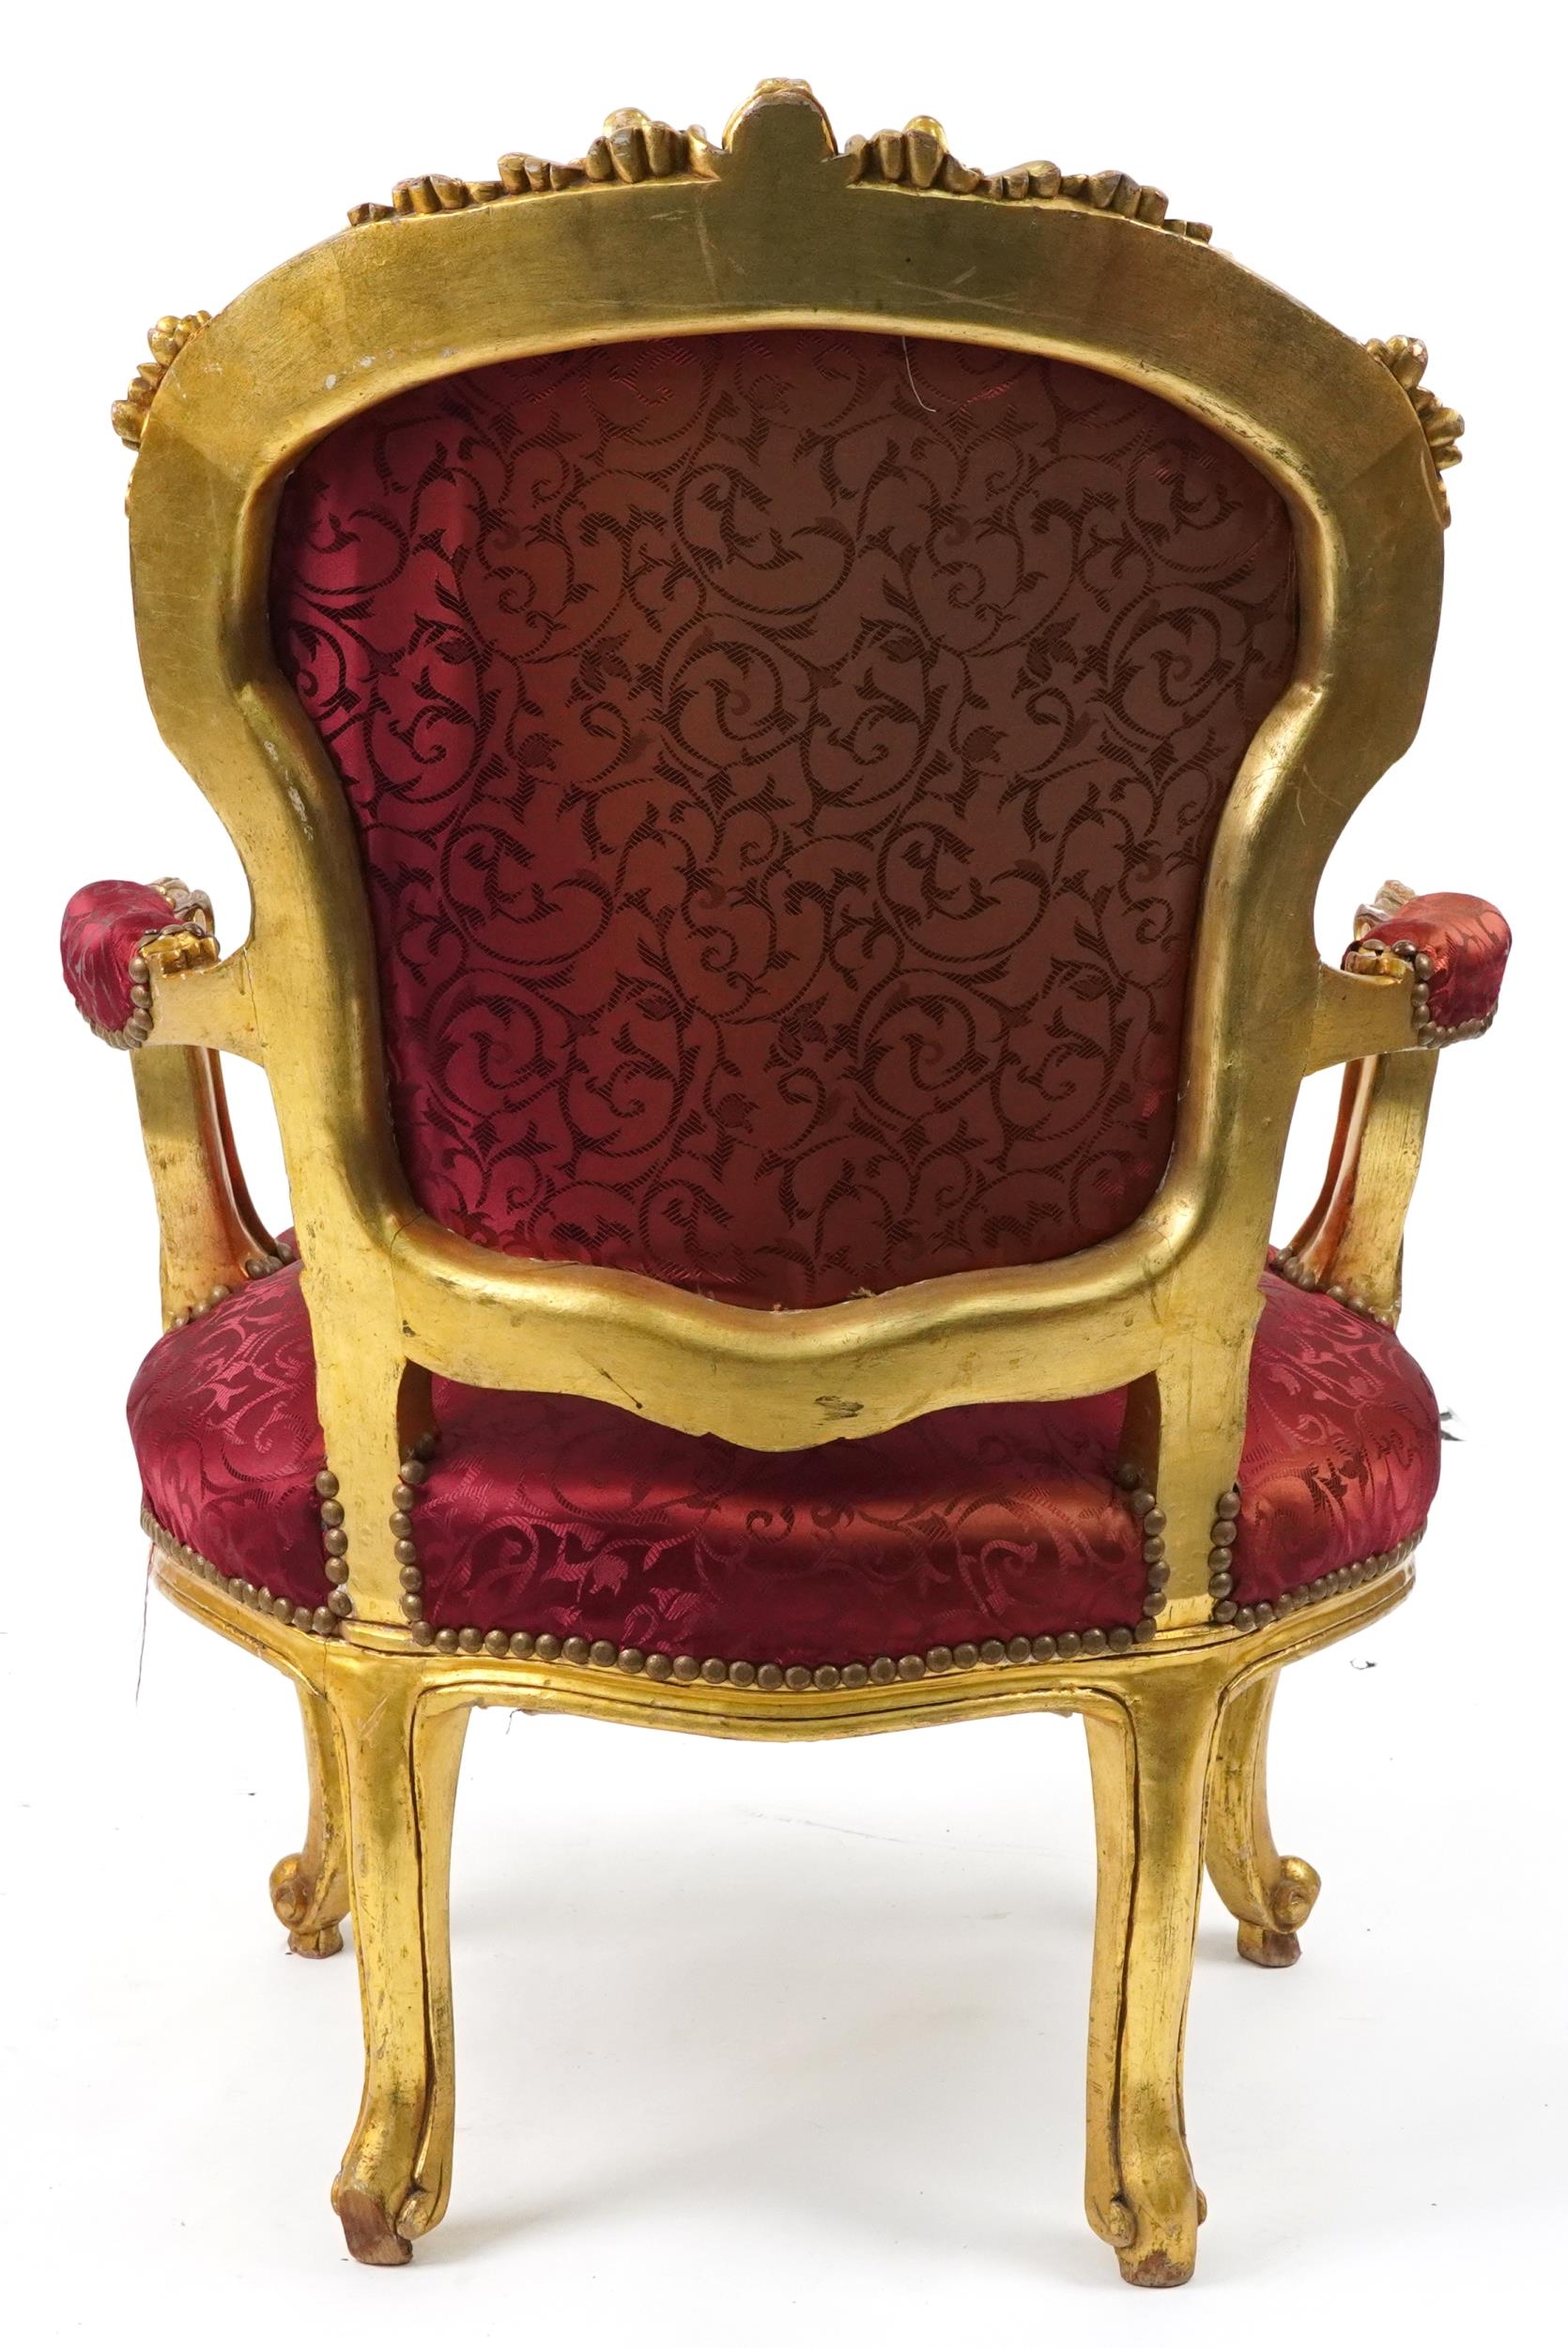 French Louis XV style elbow chair carved with flowers having red part silk floral button back - Image 4 of 4